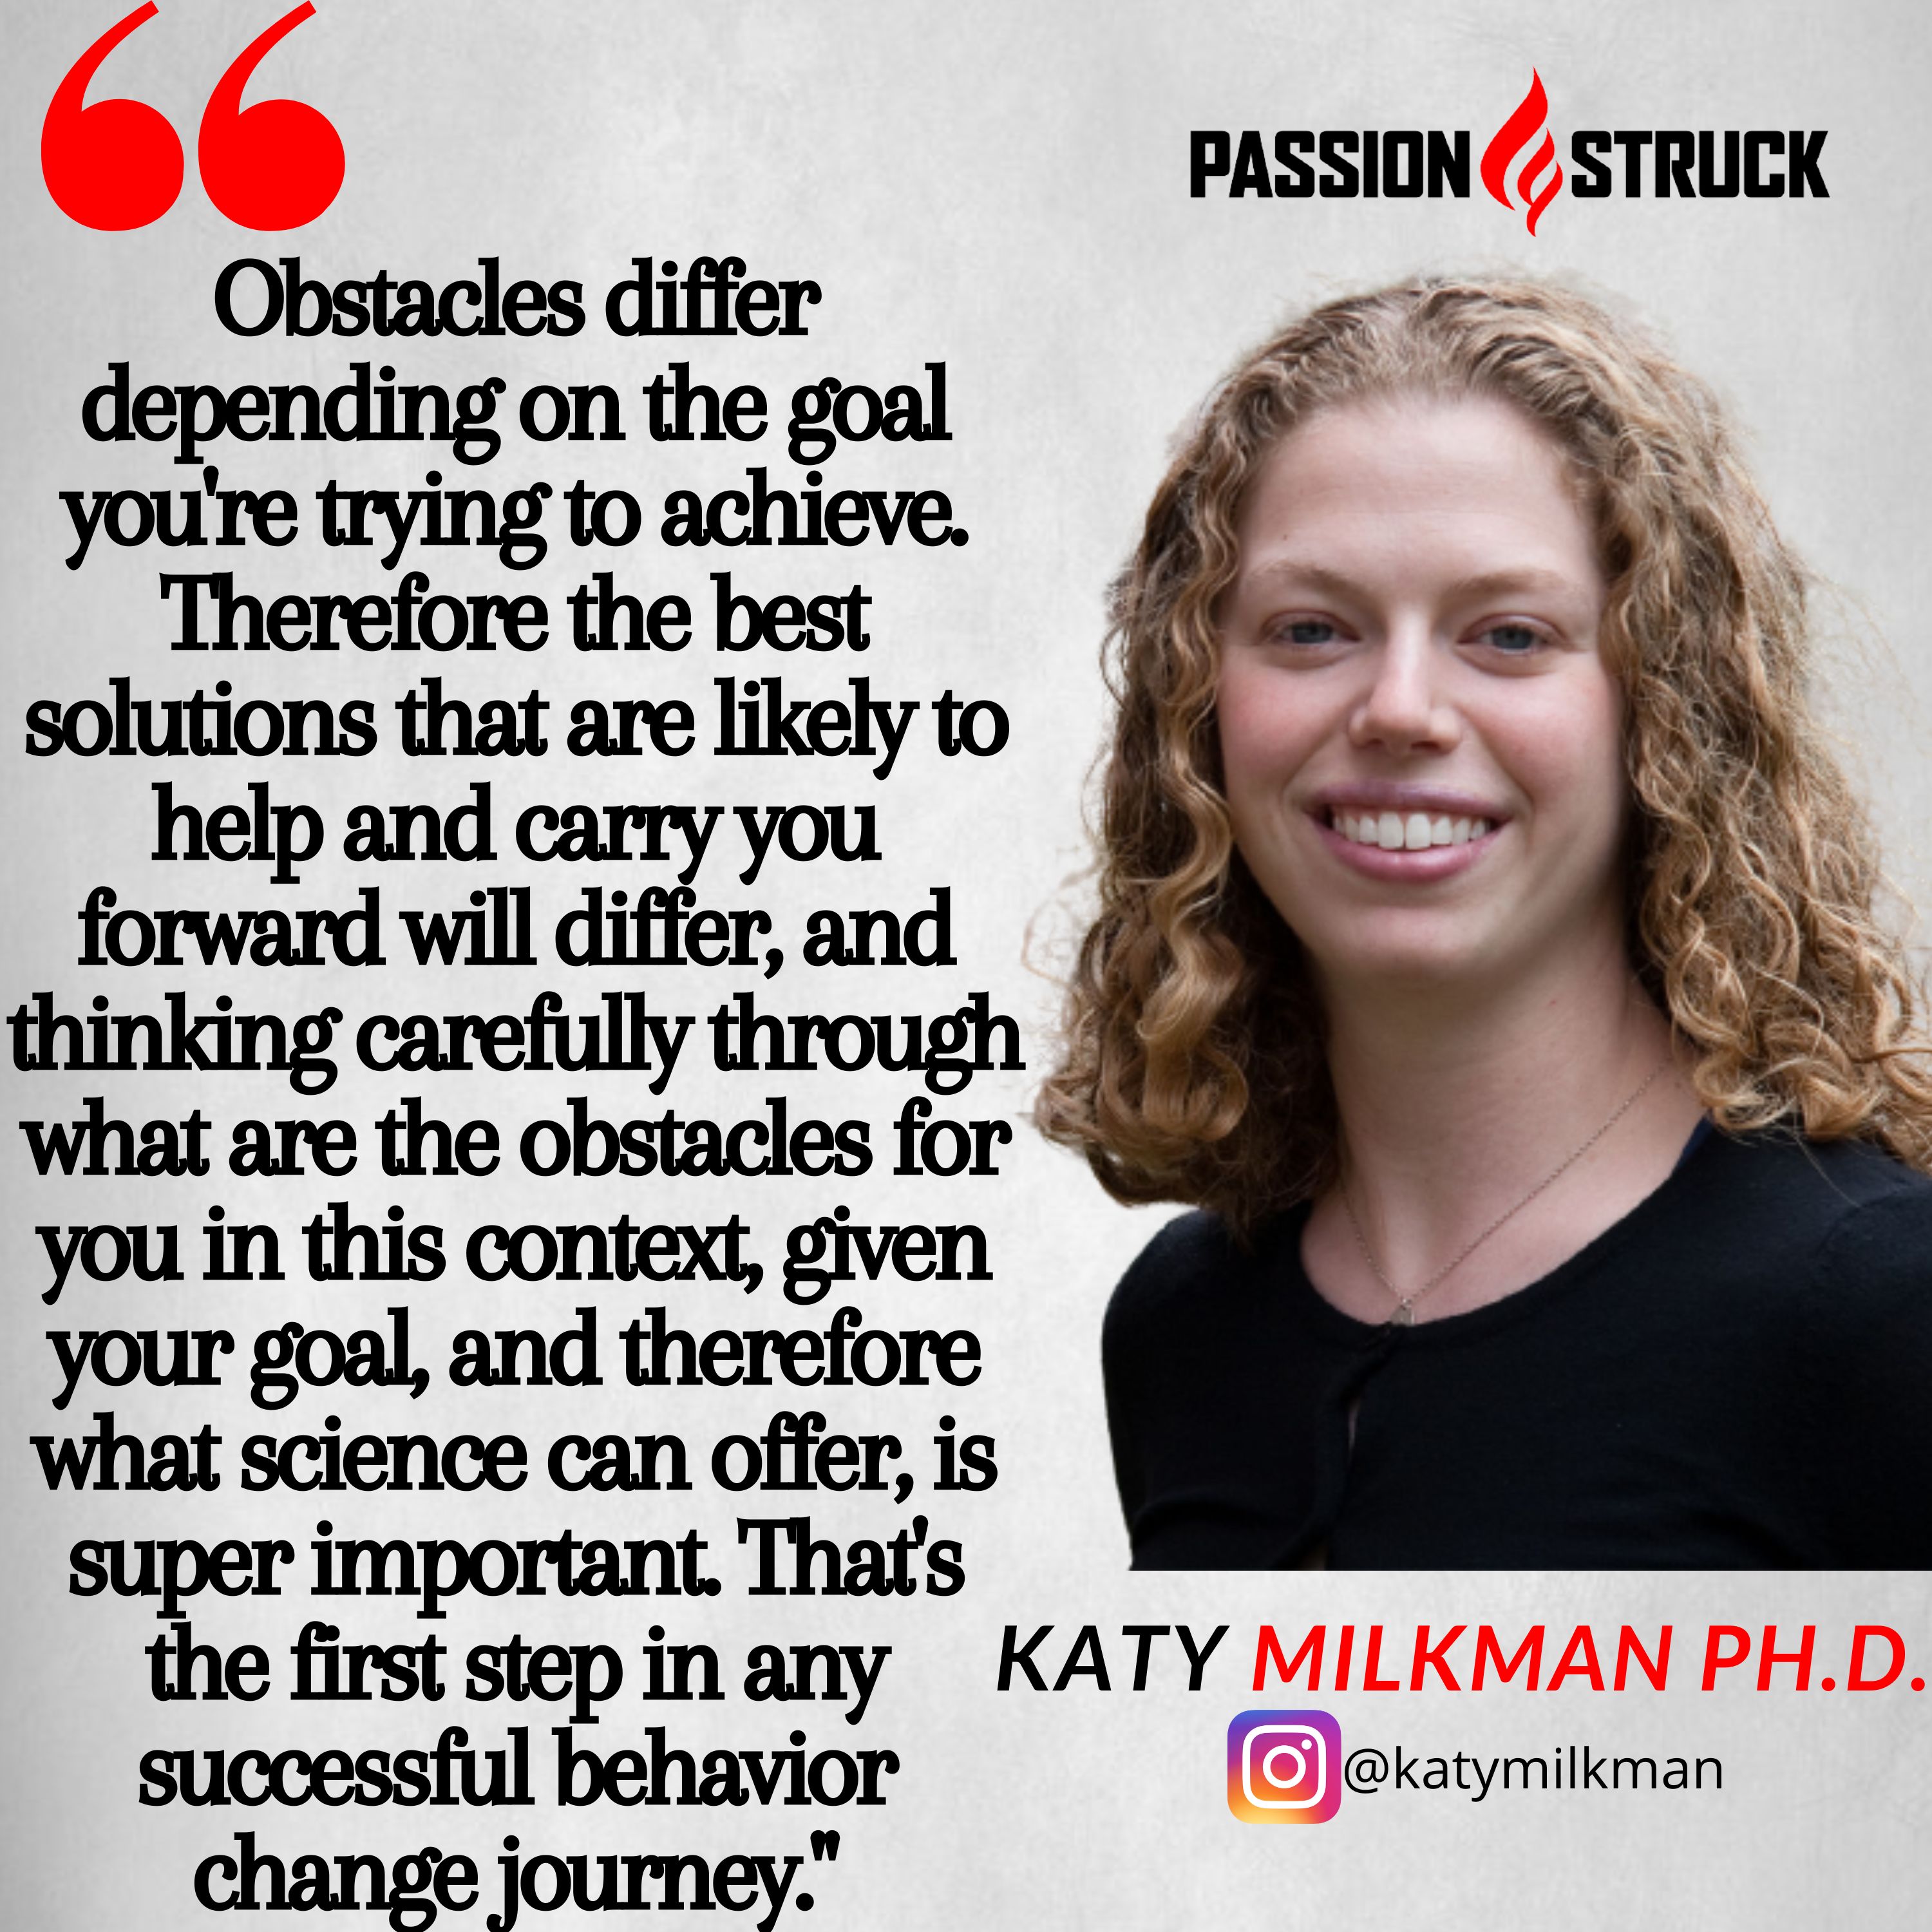 Katy Milkman quote: Obstacles differ depending on the goal you're trying to achieve. Therefore the best solutions that are likely to help and carry you forward will differ, and thinking carefully through what are the obstacles for you in this context, given your goal, and therefore what science can offer, is super important. That's the first step in any successful behavior change journey."